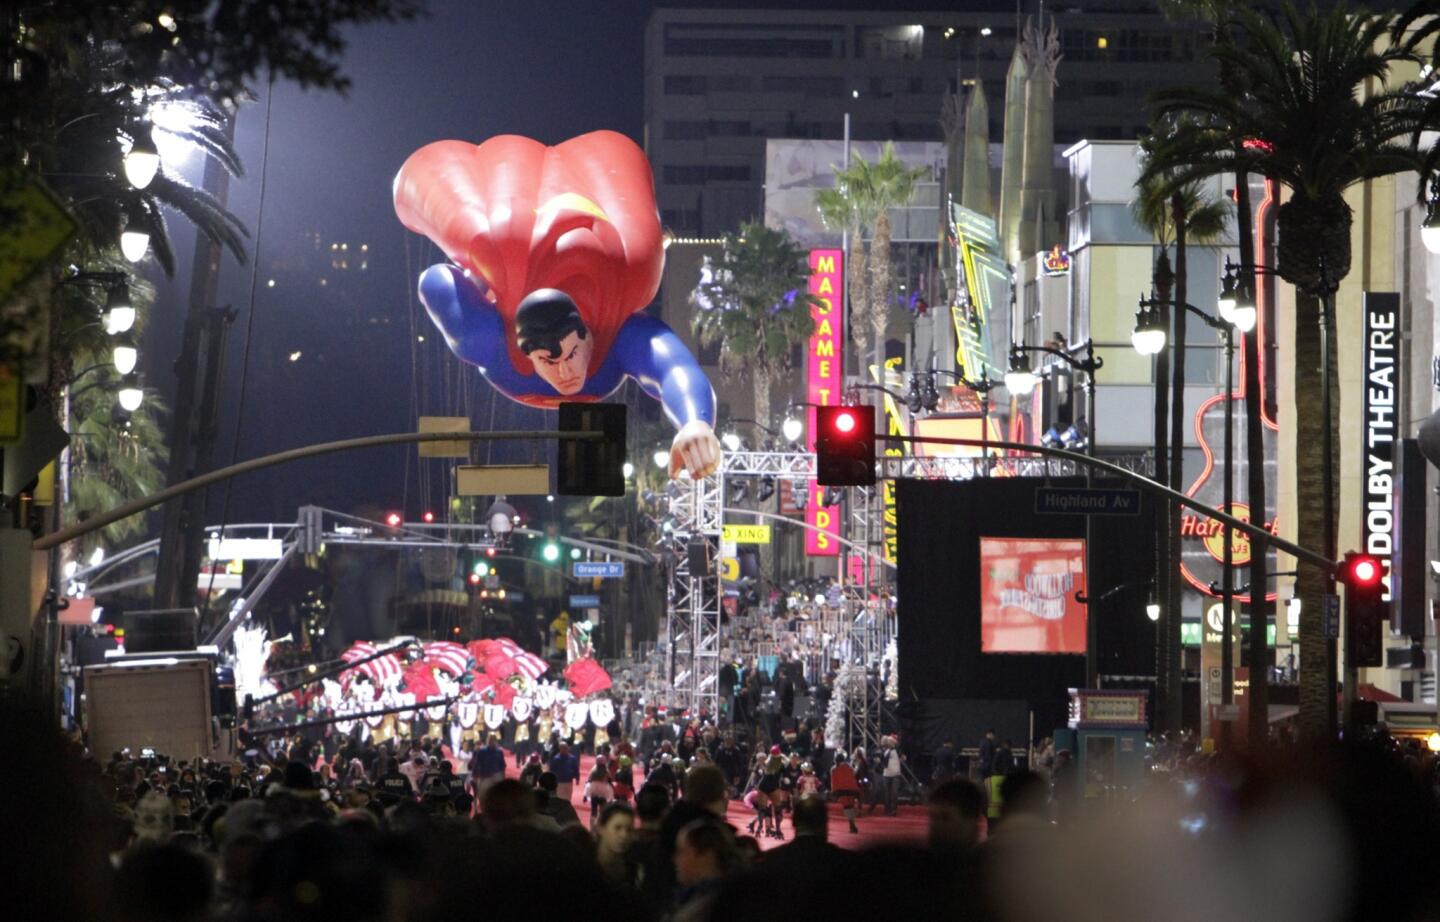 The Superman balloon floats down the street in the 82nd Hollywood Christmas Parade.